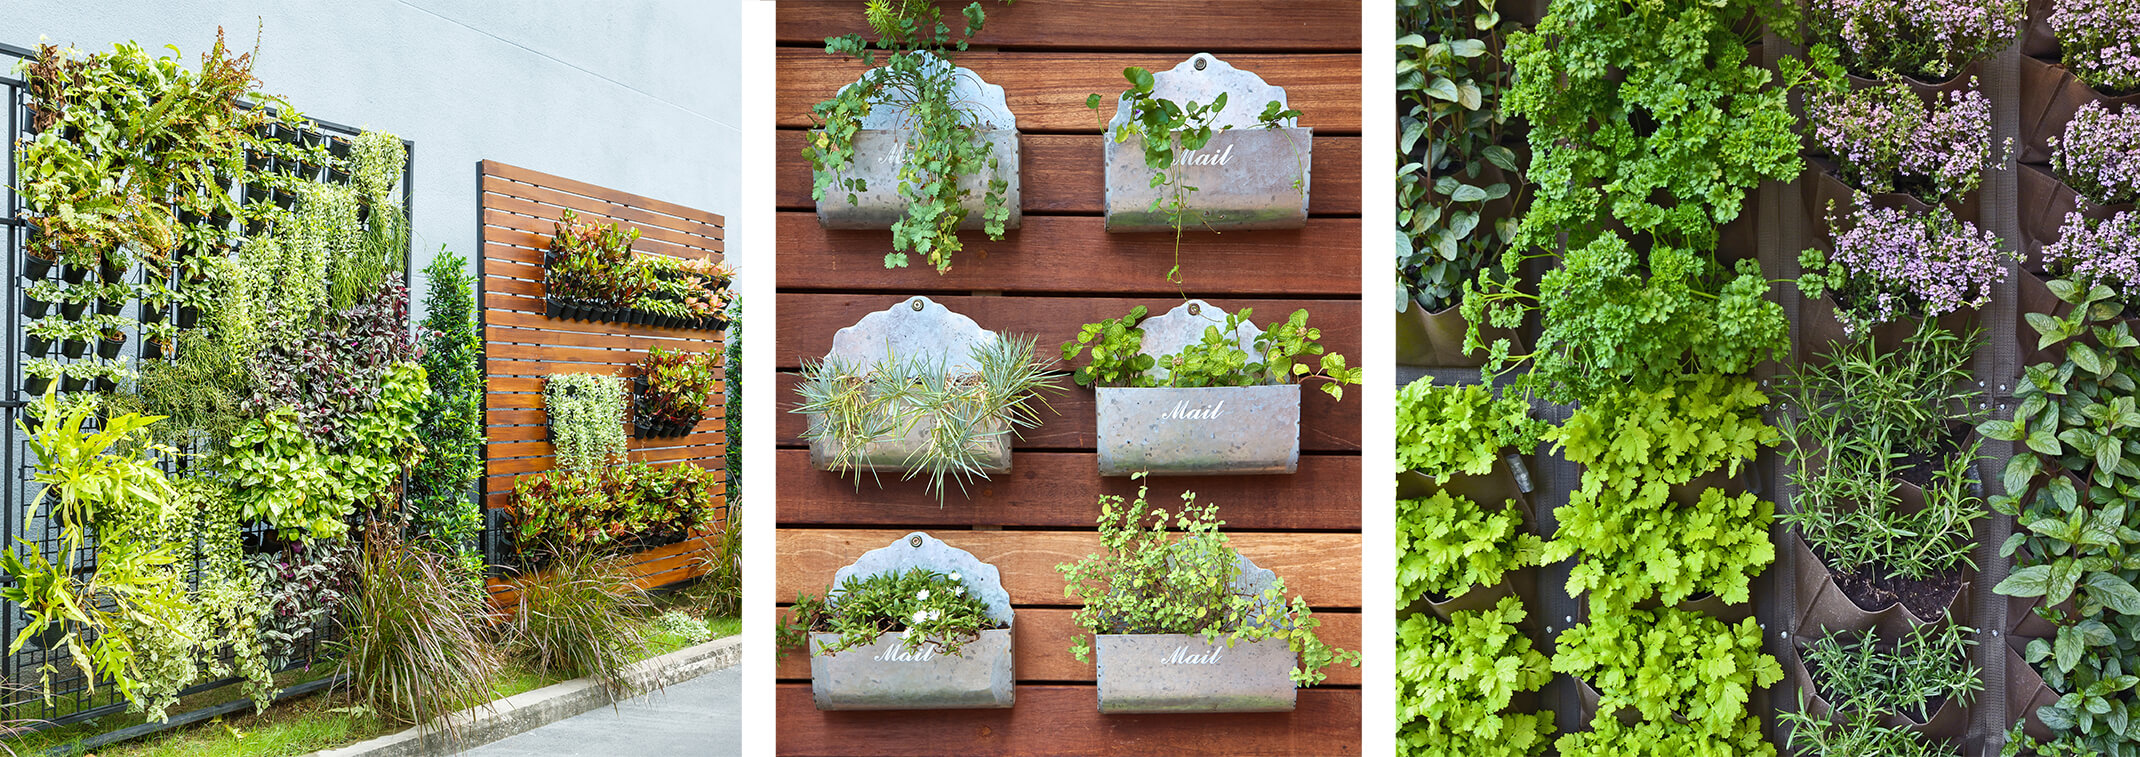 3 images: vertical outdoor walls - 1 made from metal and the other from wood with vertical containers filled with a wide variety of plants; a wood wall with envelope style metal mailboxes hanging on it and featuring a variety of plants; a wall of vertical plant pockets with a variety of herbs planted throughout